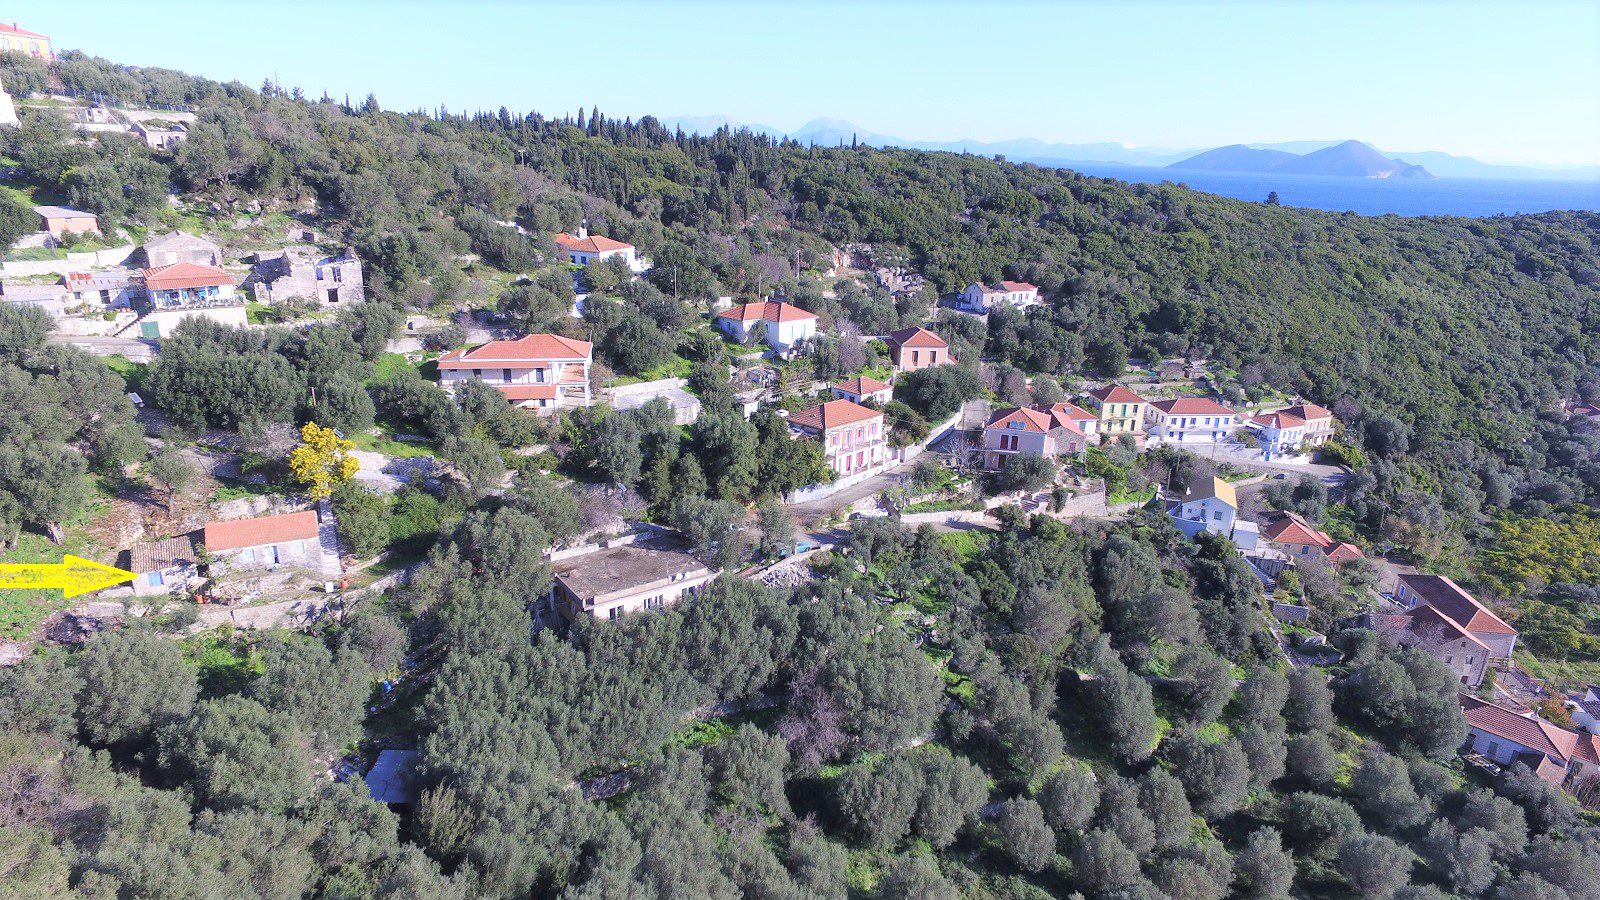 Aerial views of house for sale on Ithaca Greece, Kioni